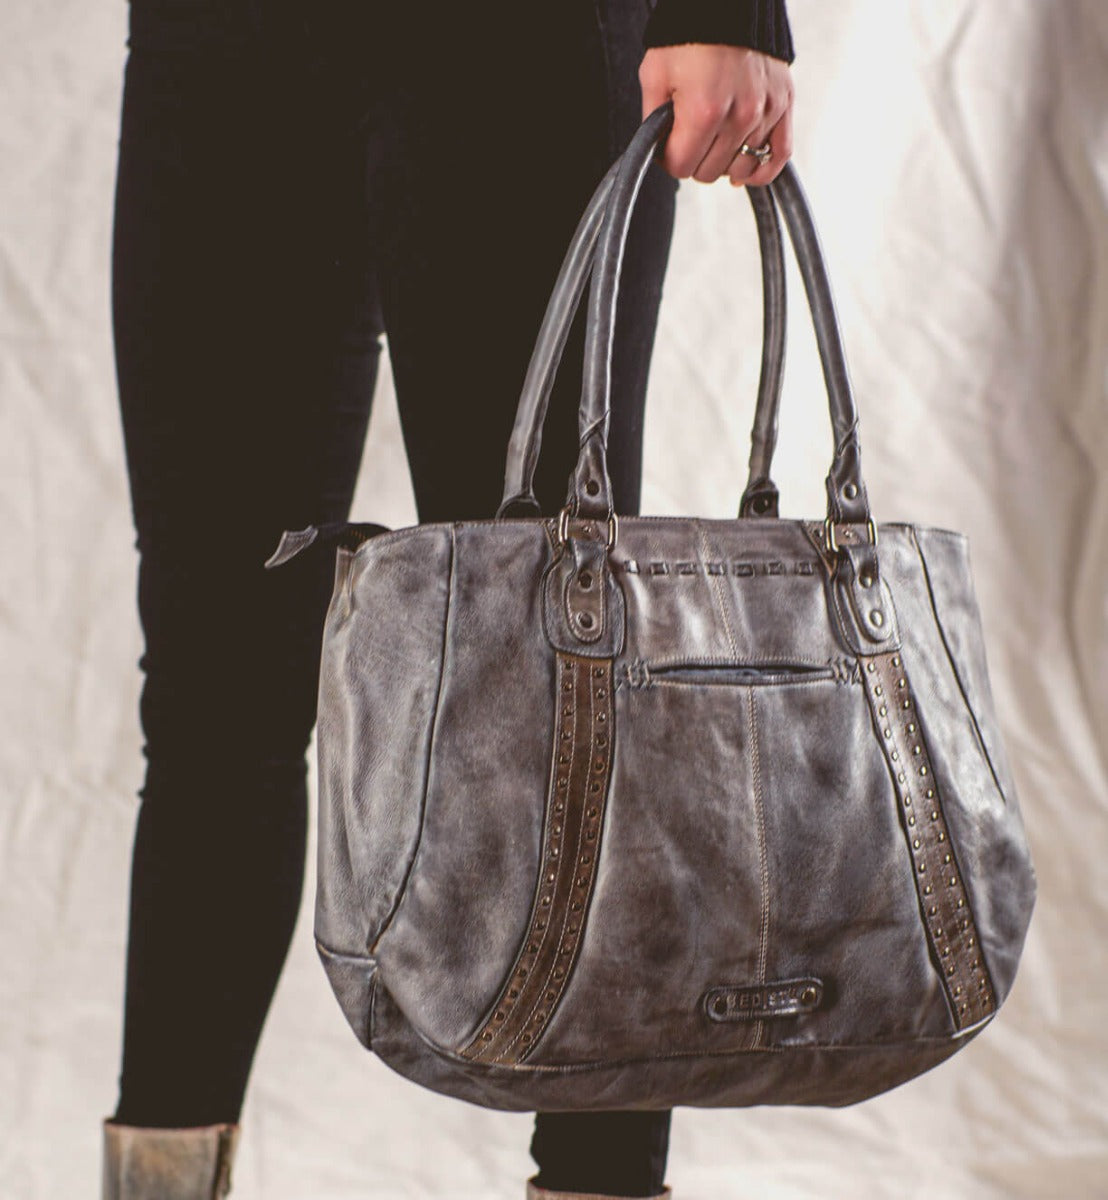 A woman is holding a grey leather Bed Stu Geraldin tote bag.